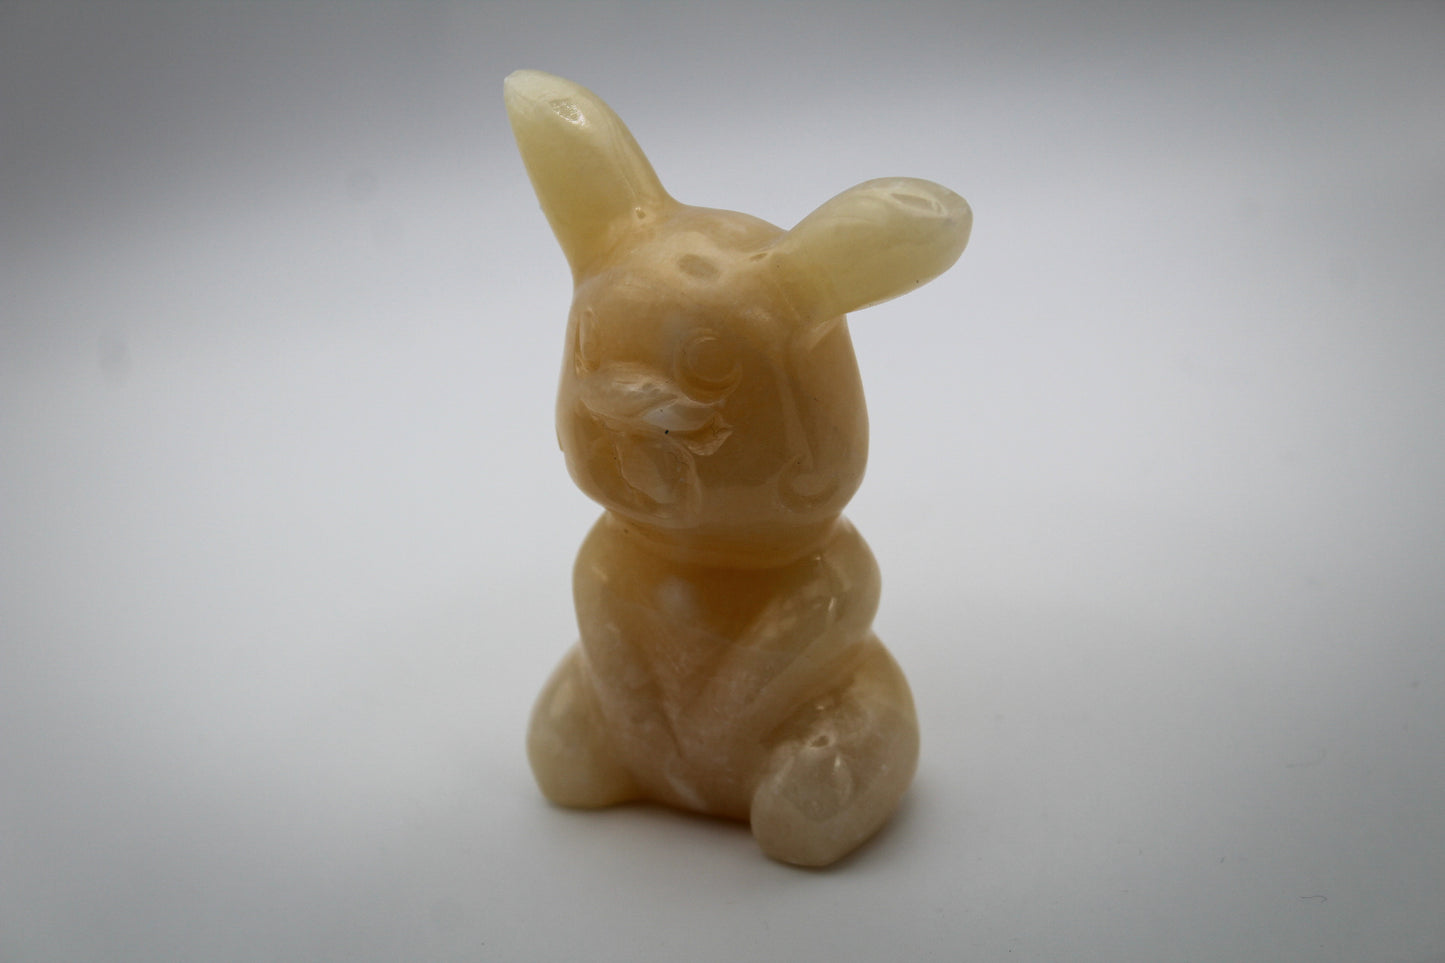 Bunny carving